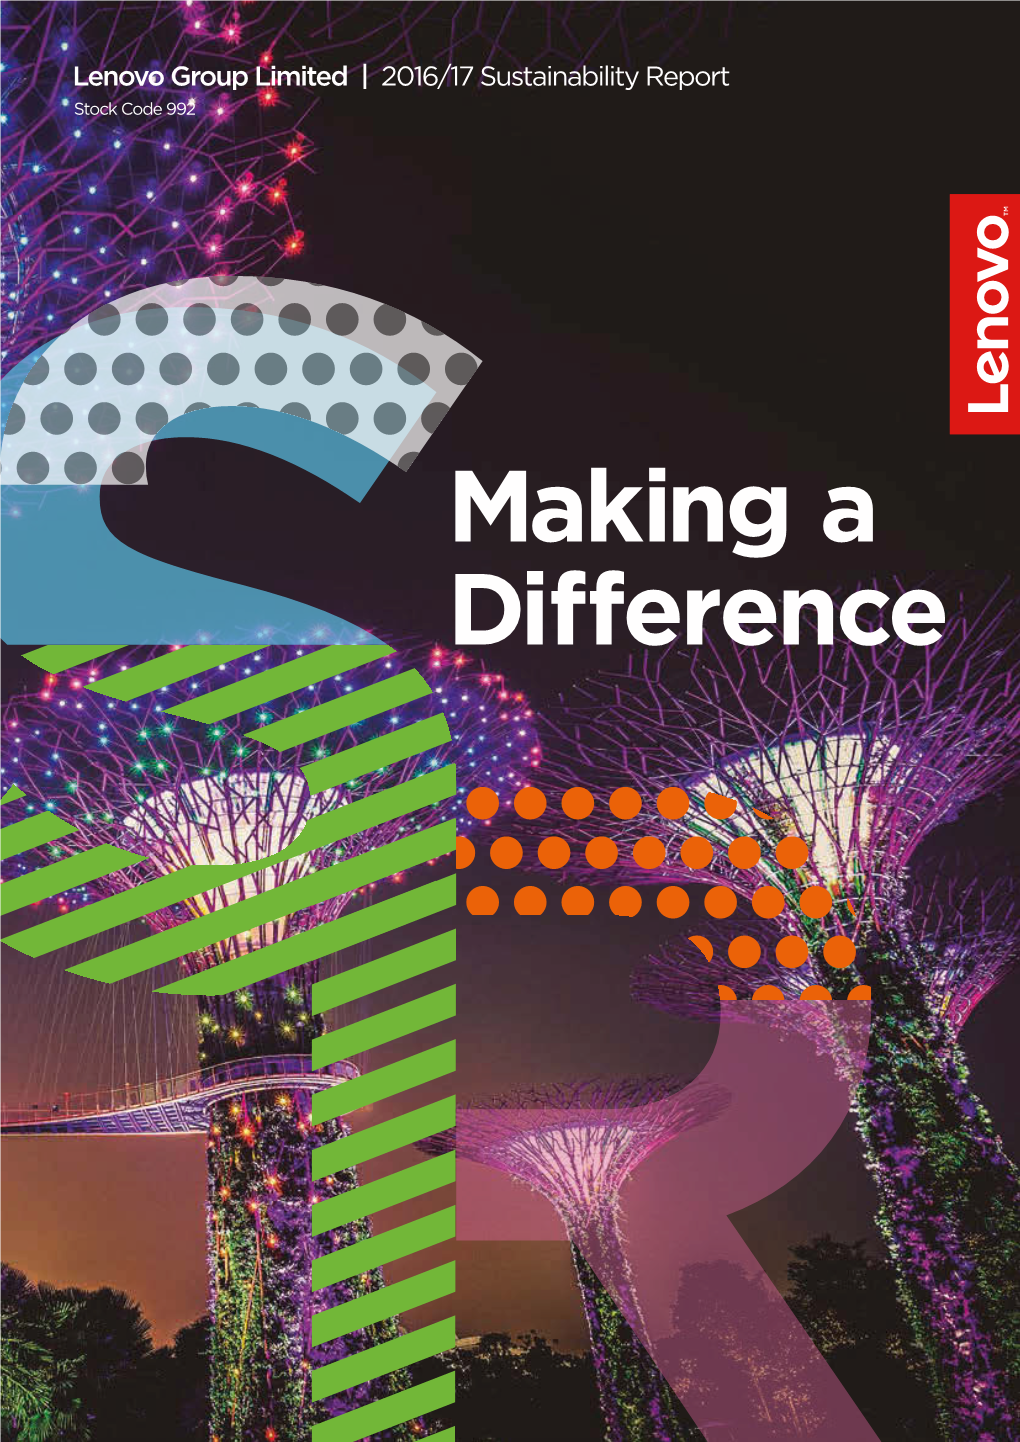 Making a Difference Lenovo Is Passionate About Its Commitment to Serve As a Global Corporate Citizen and Leader in Sustainable Business Practices